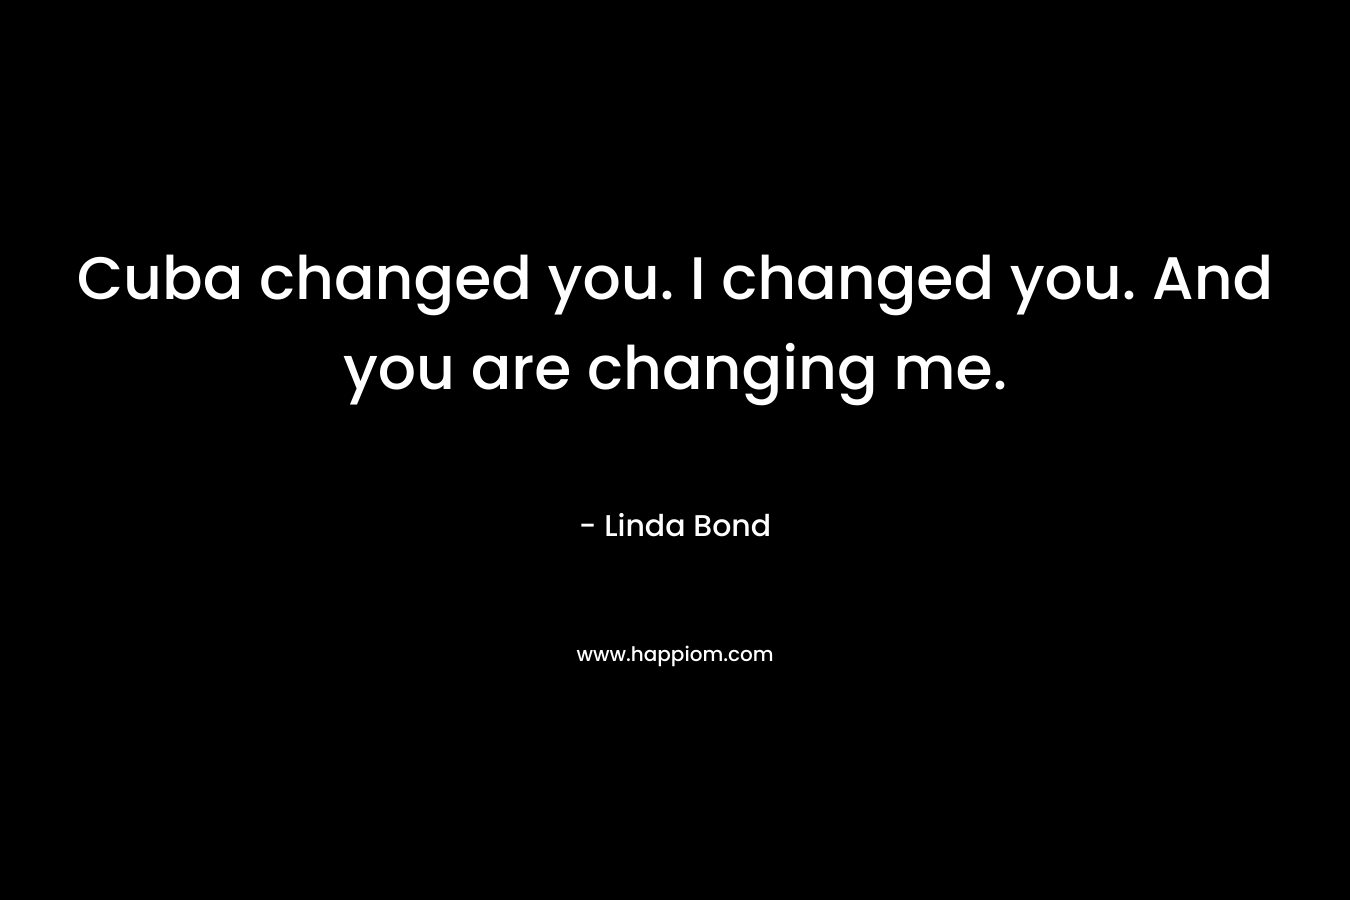 Cuba changed you. I changed you. And you are changing me.